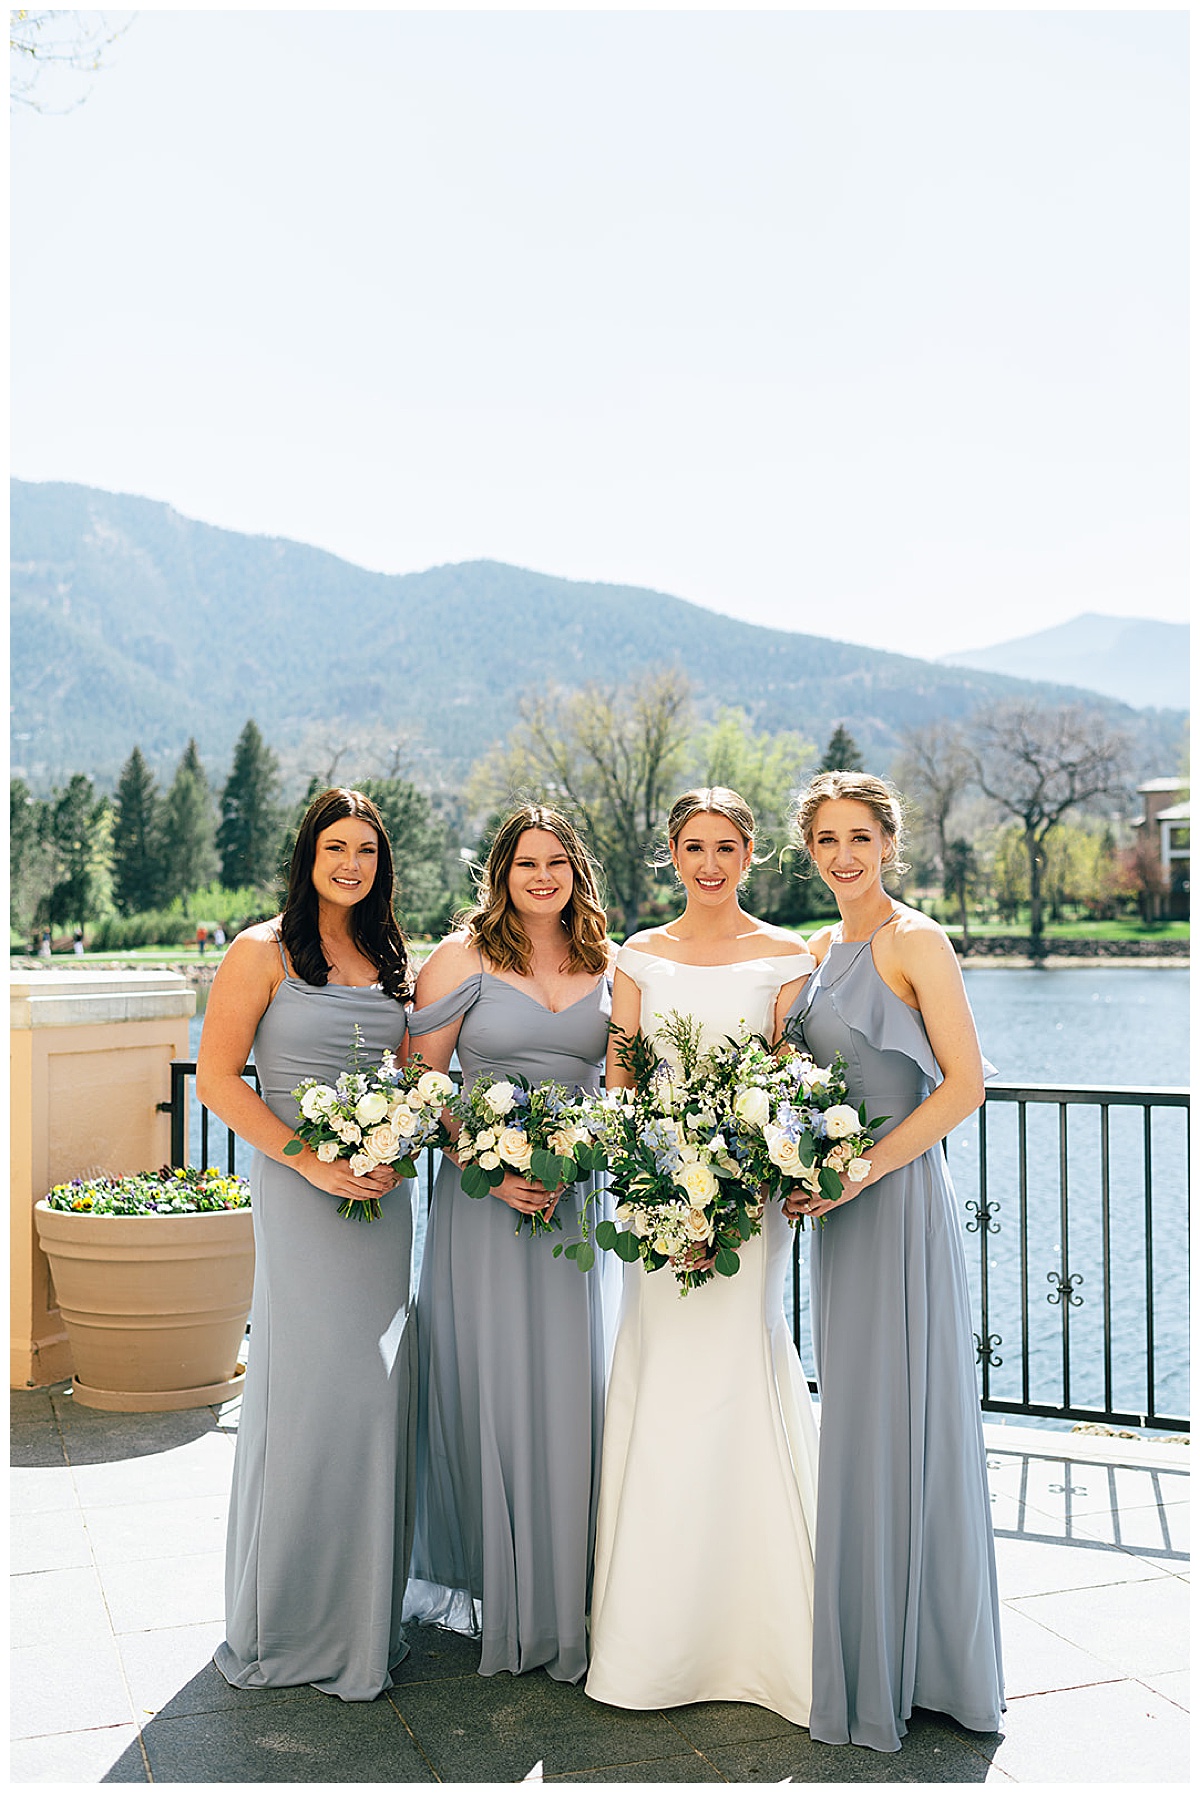 Bride and bridesmaids by Detroit Wedding Photographer